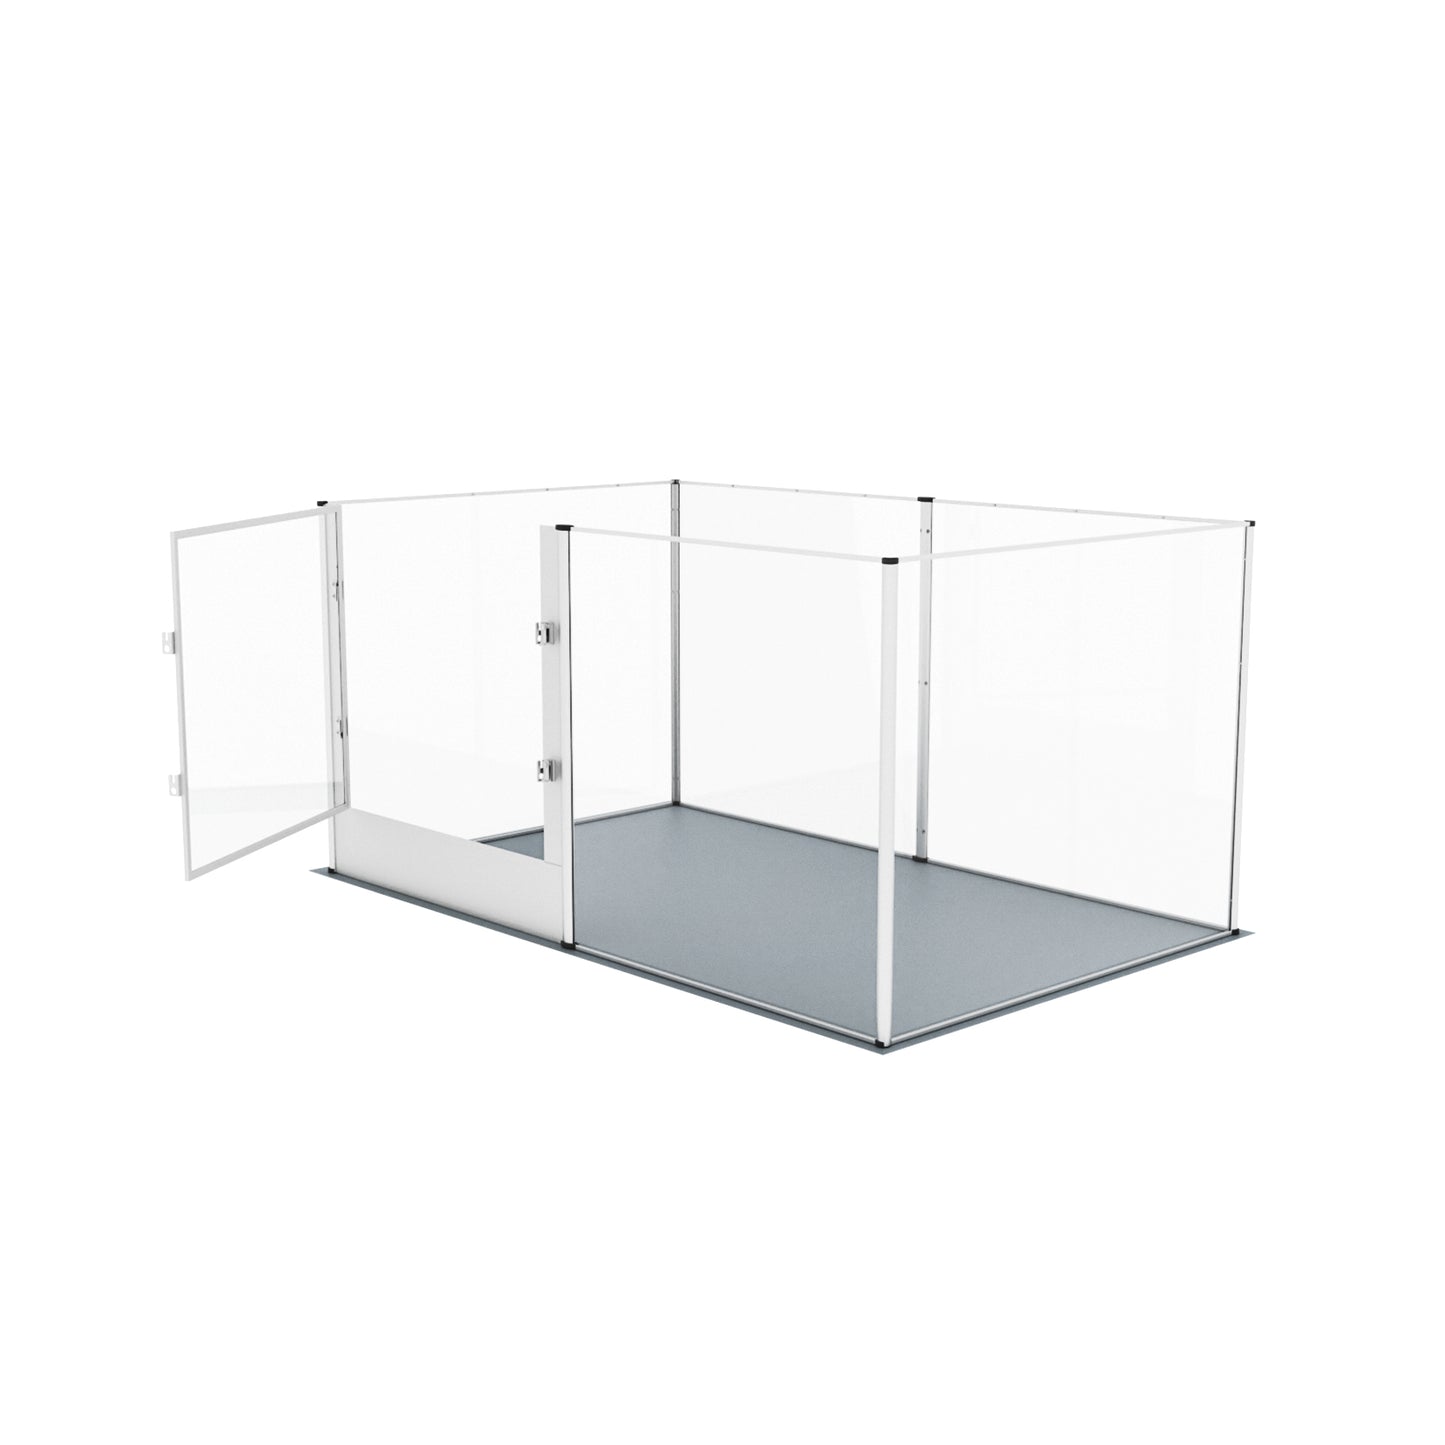 Acrylic Dog Playpen Fence: Indoor Clear Acrylic Pet Whelping Pen Box Dog Playpen Kennel Crate 80cm Taller with Waterproof Pad for Dogs, Rabbits, Guinea Pig